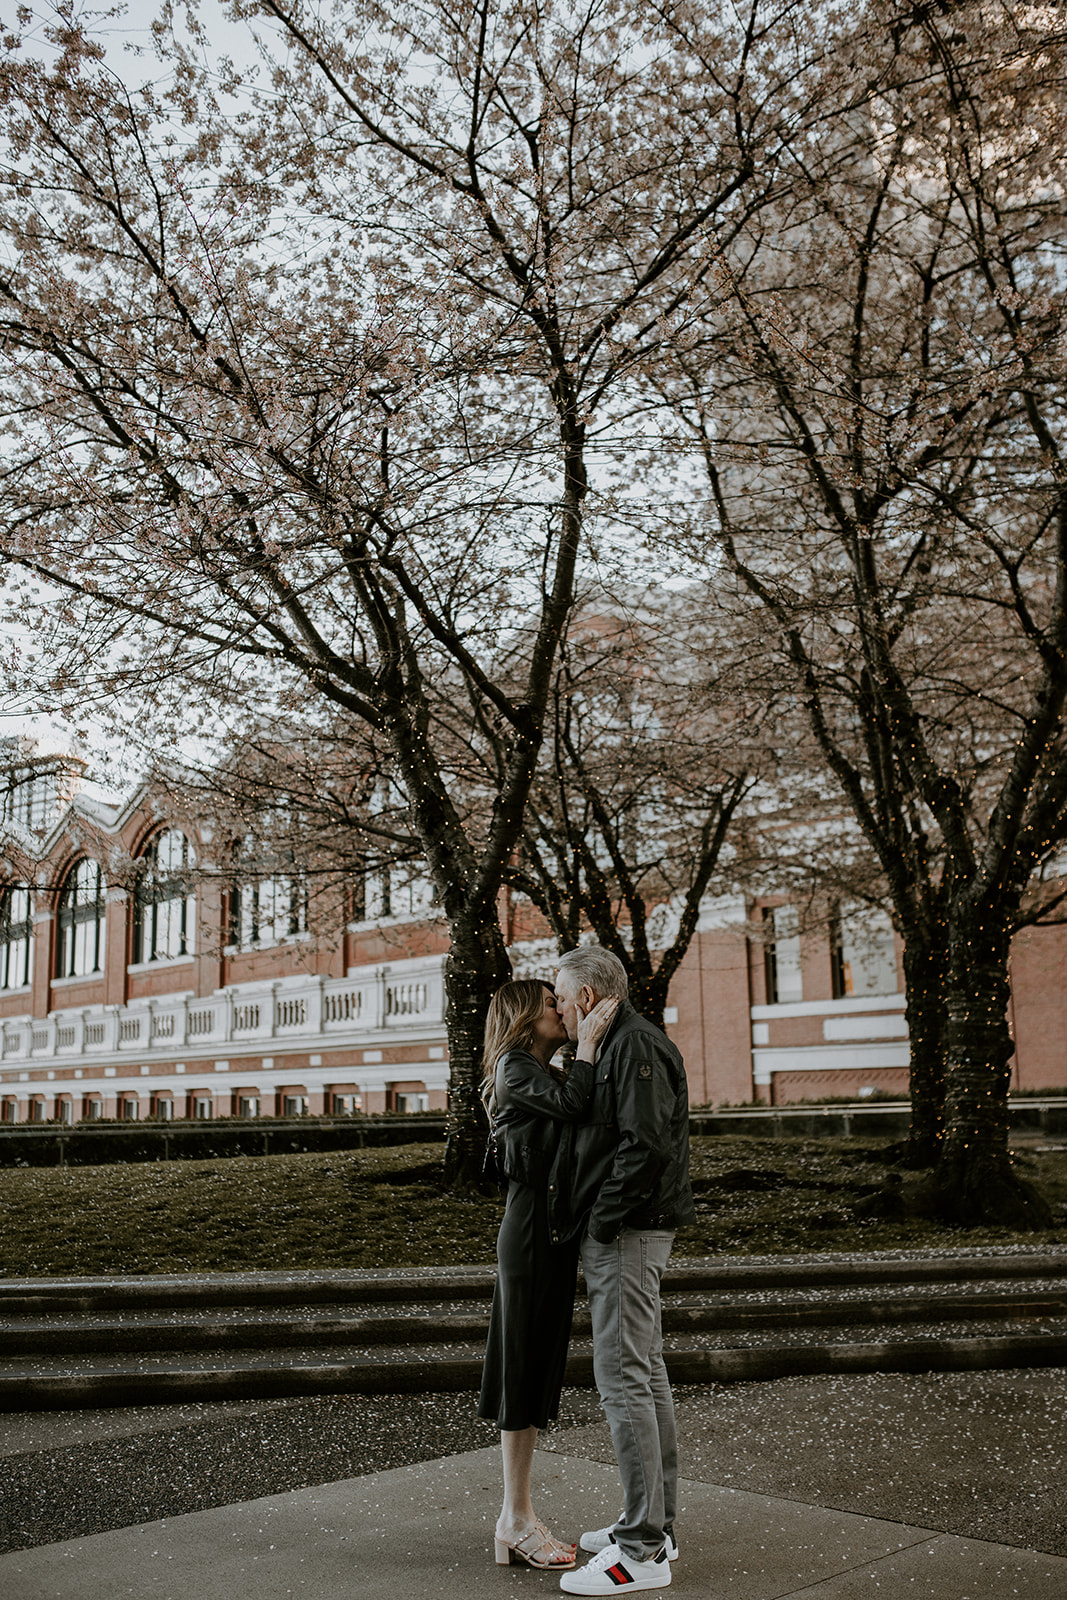 Engagement Photography in Vancouver